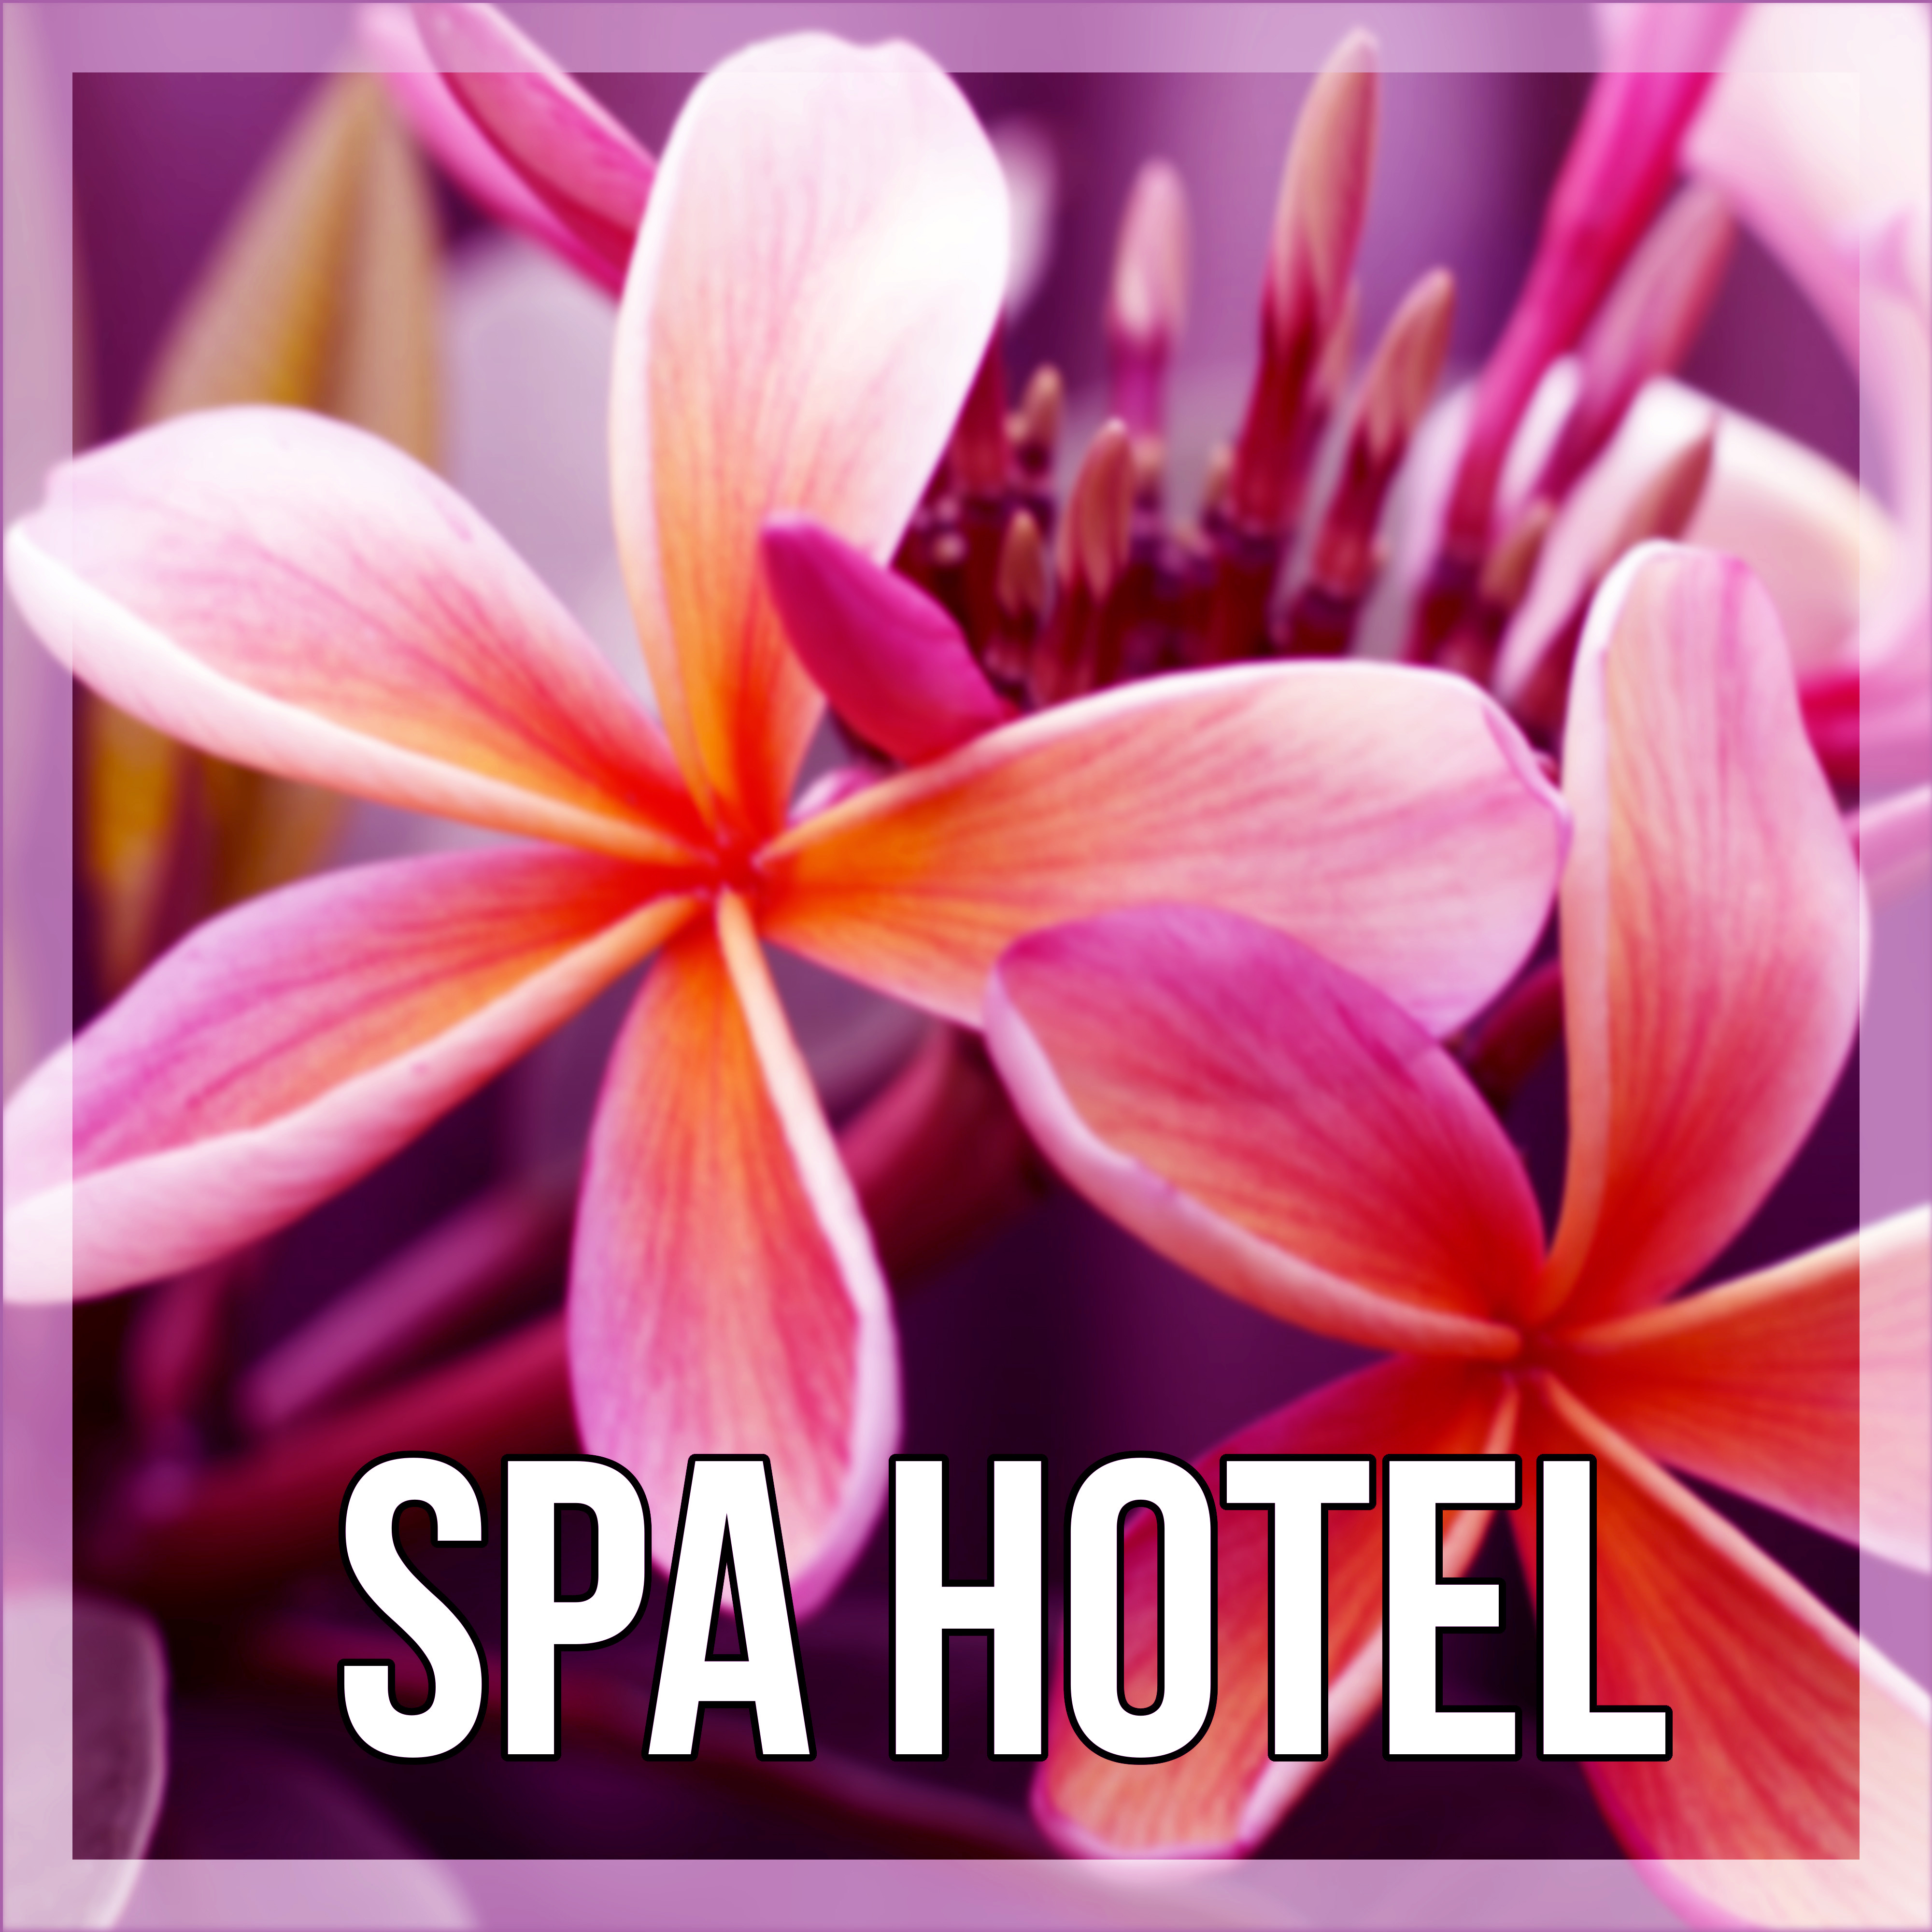 Spa Hotel - Natural Balance, Wellness Spa, Background Music for Relaxing, Relax in Spa, Mind and Body Harmony